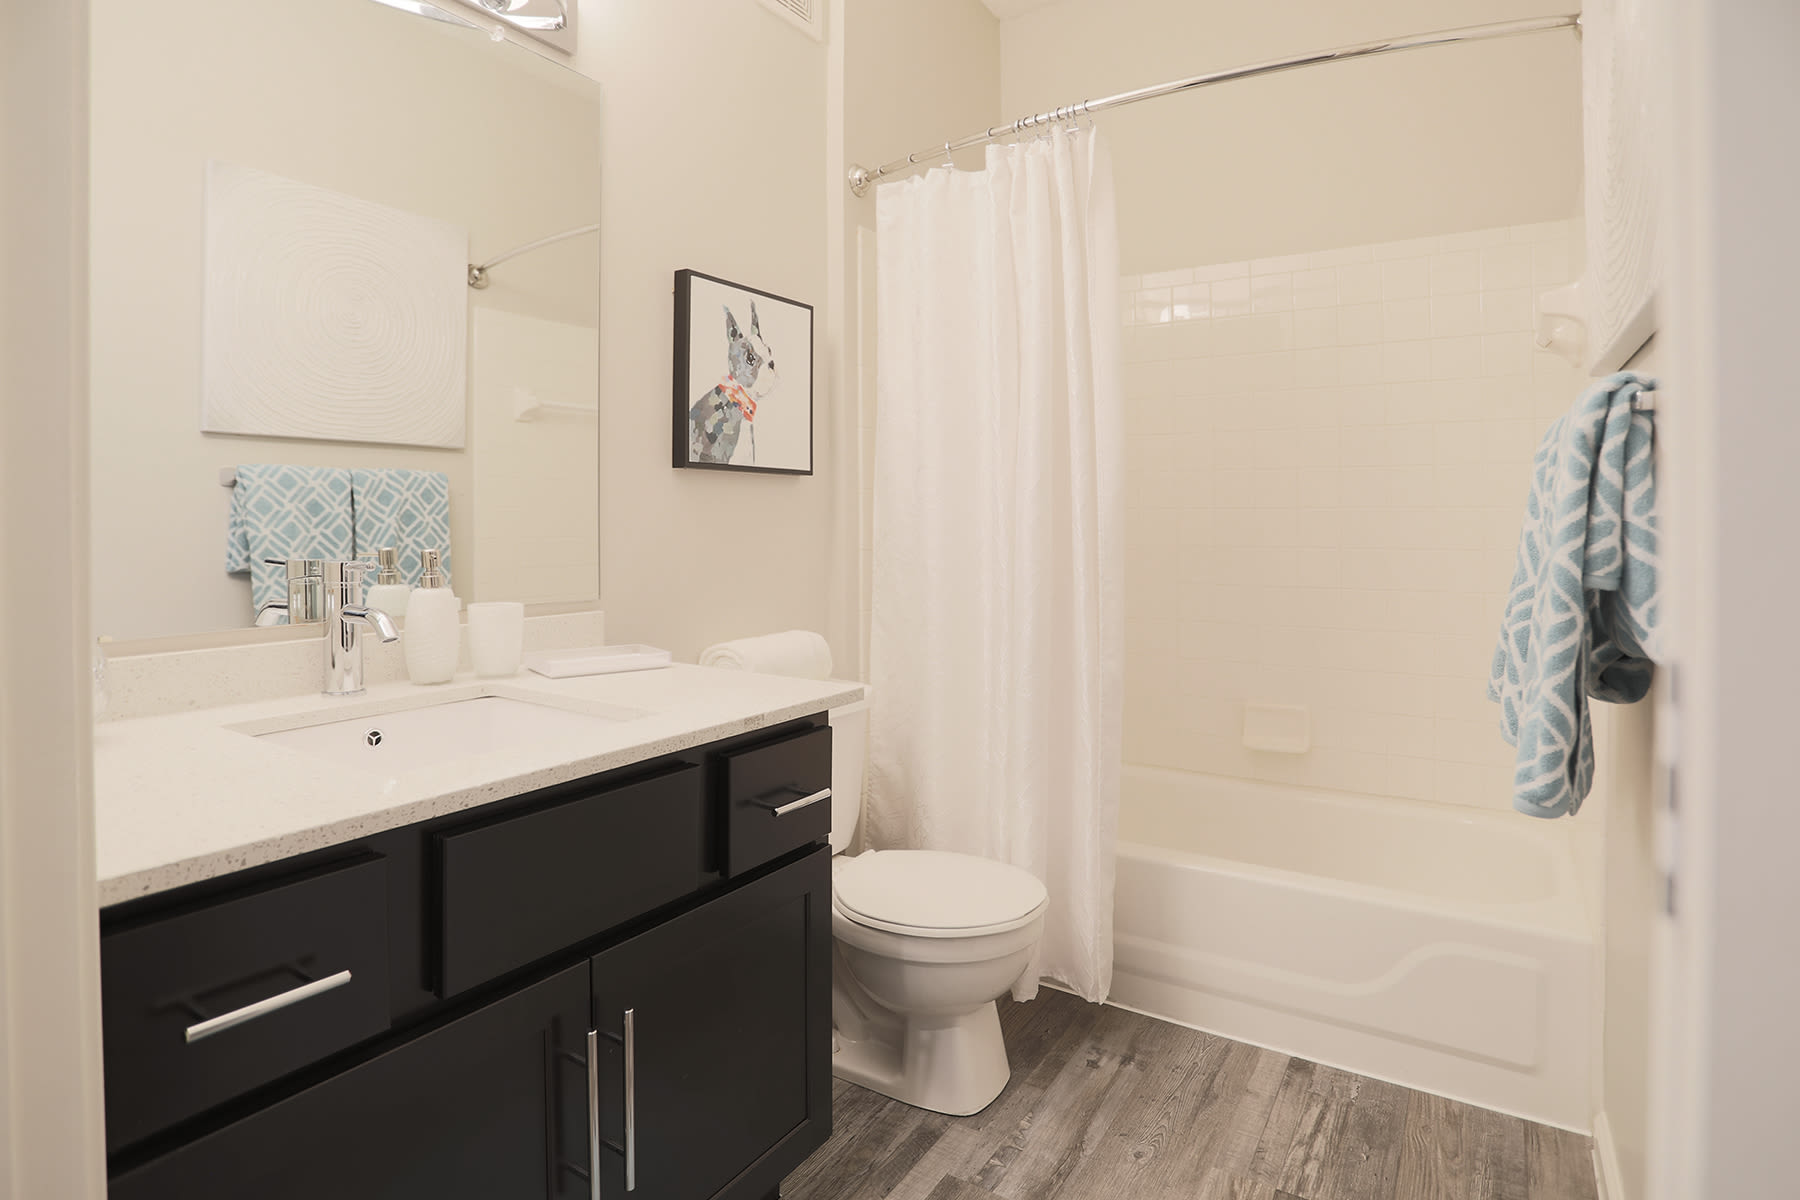 Bathroom with shower and bathtub at The Landings at Beckett Ridge in West Chester, Ohio